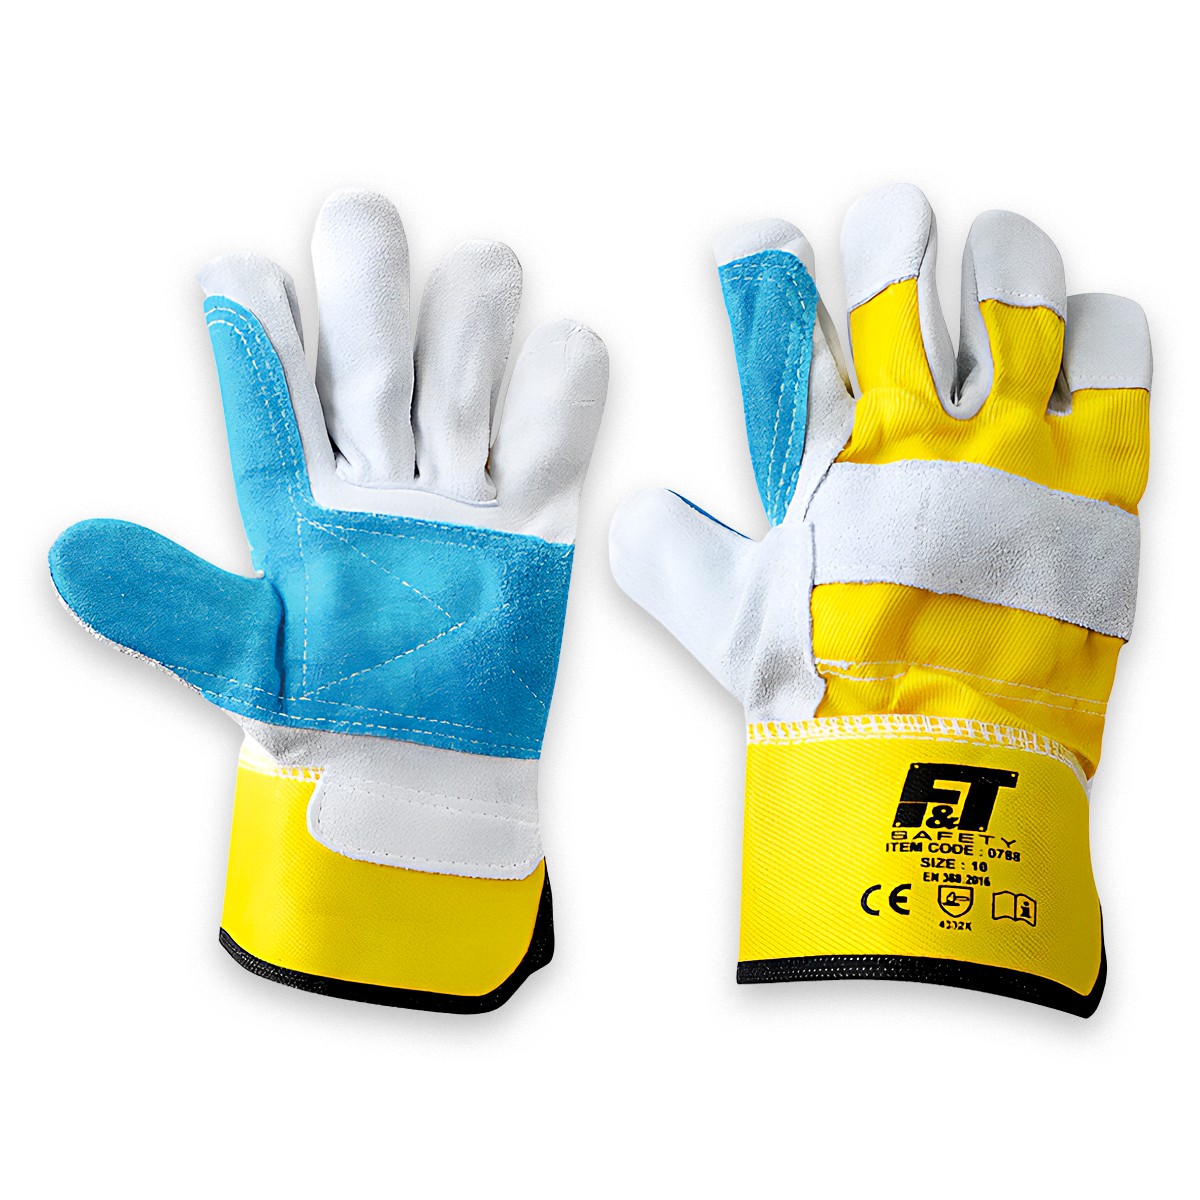 WORKING GLOVES DOUBLE PALM N10